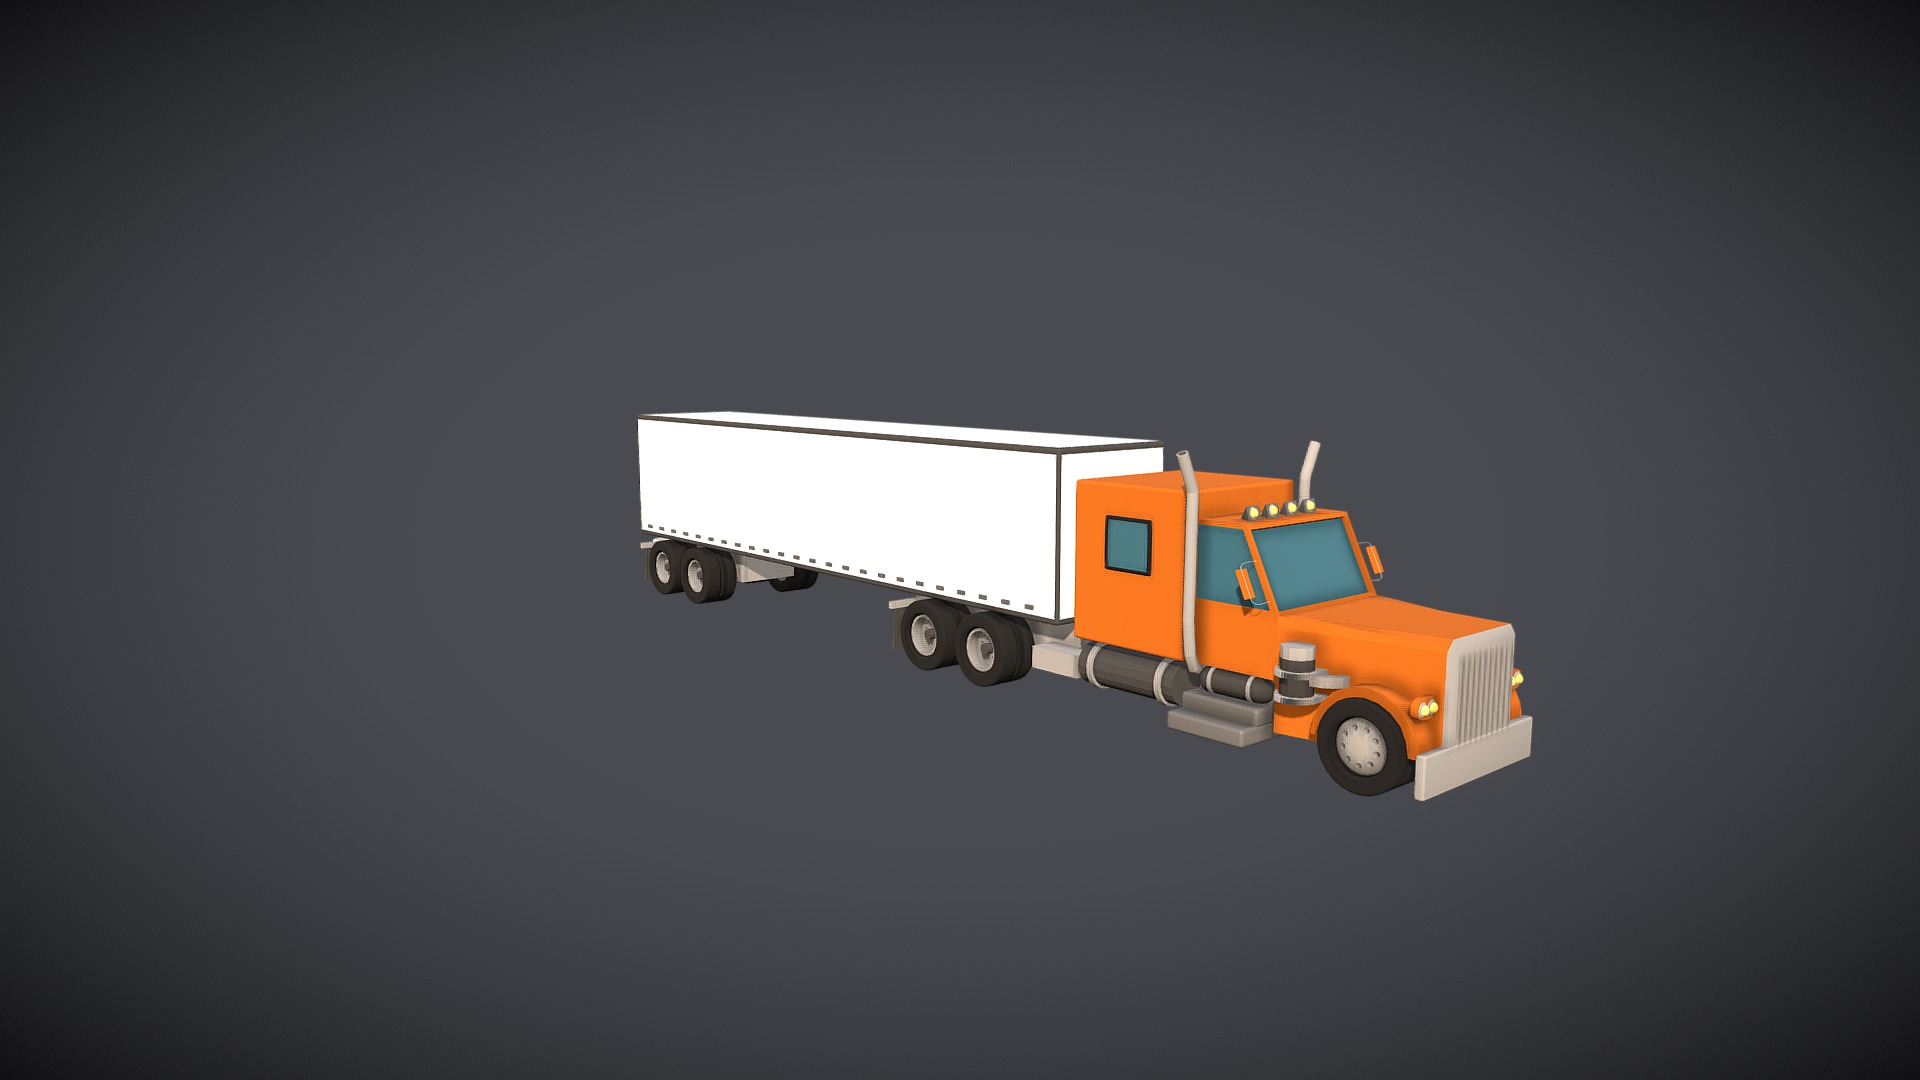 3D model Low-Poly Orange Truck - This is a 3D model of the Low-Poly Orange Truck. The 3D model is about a toy truck with a trailer.